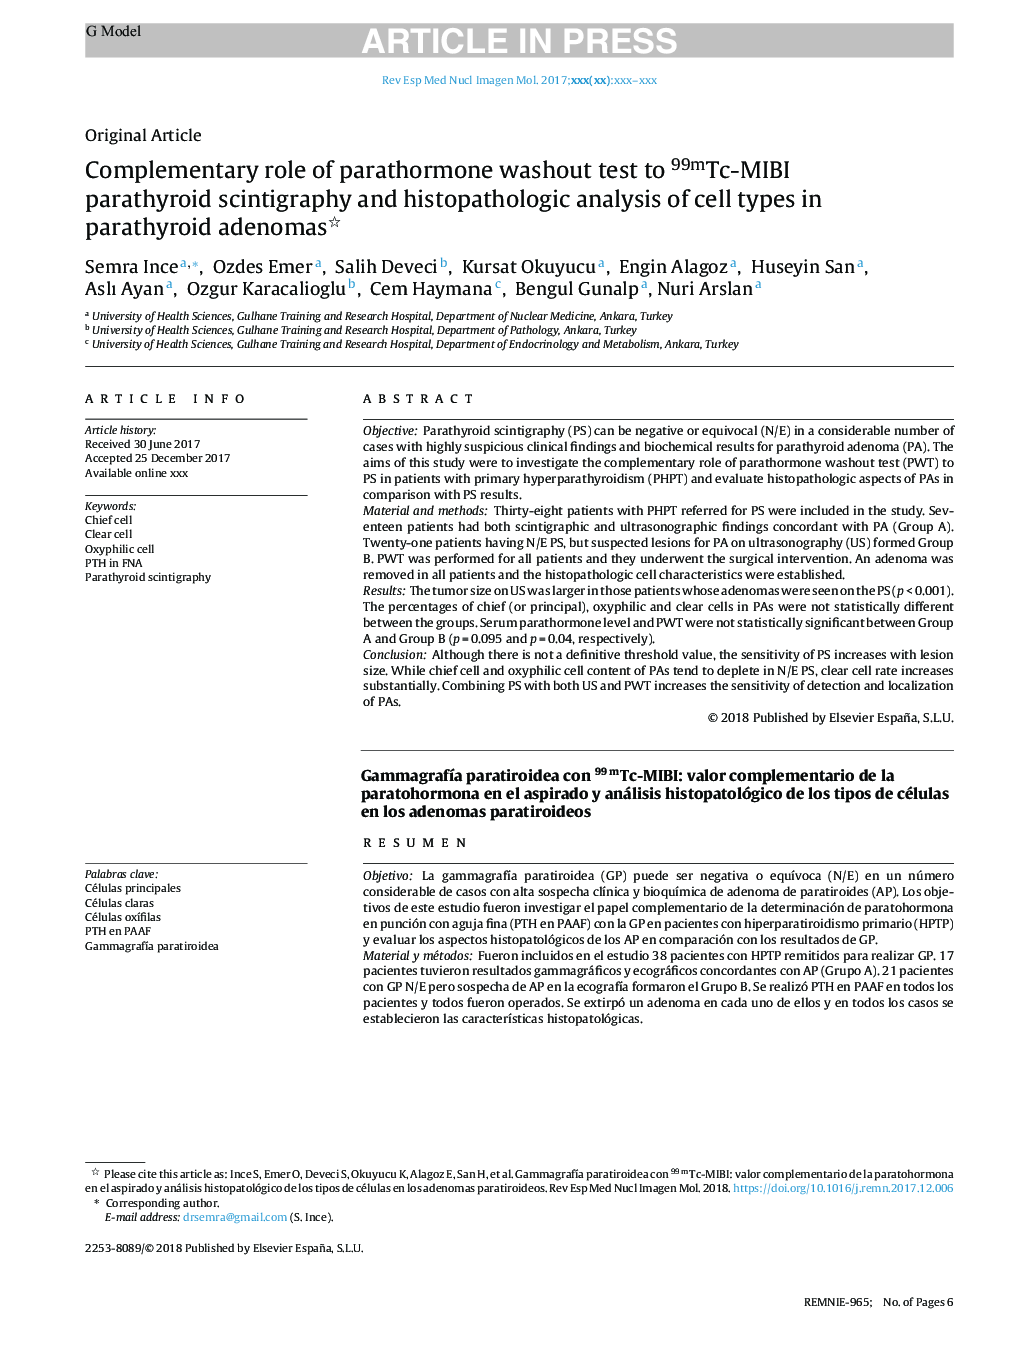 Complementary role of parathormone washout test to 99mTc-MIBI parathyroid scintigraphy and histopathologic analysis of cell types in parathyroid adenomas